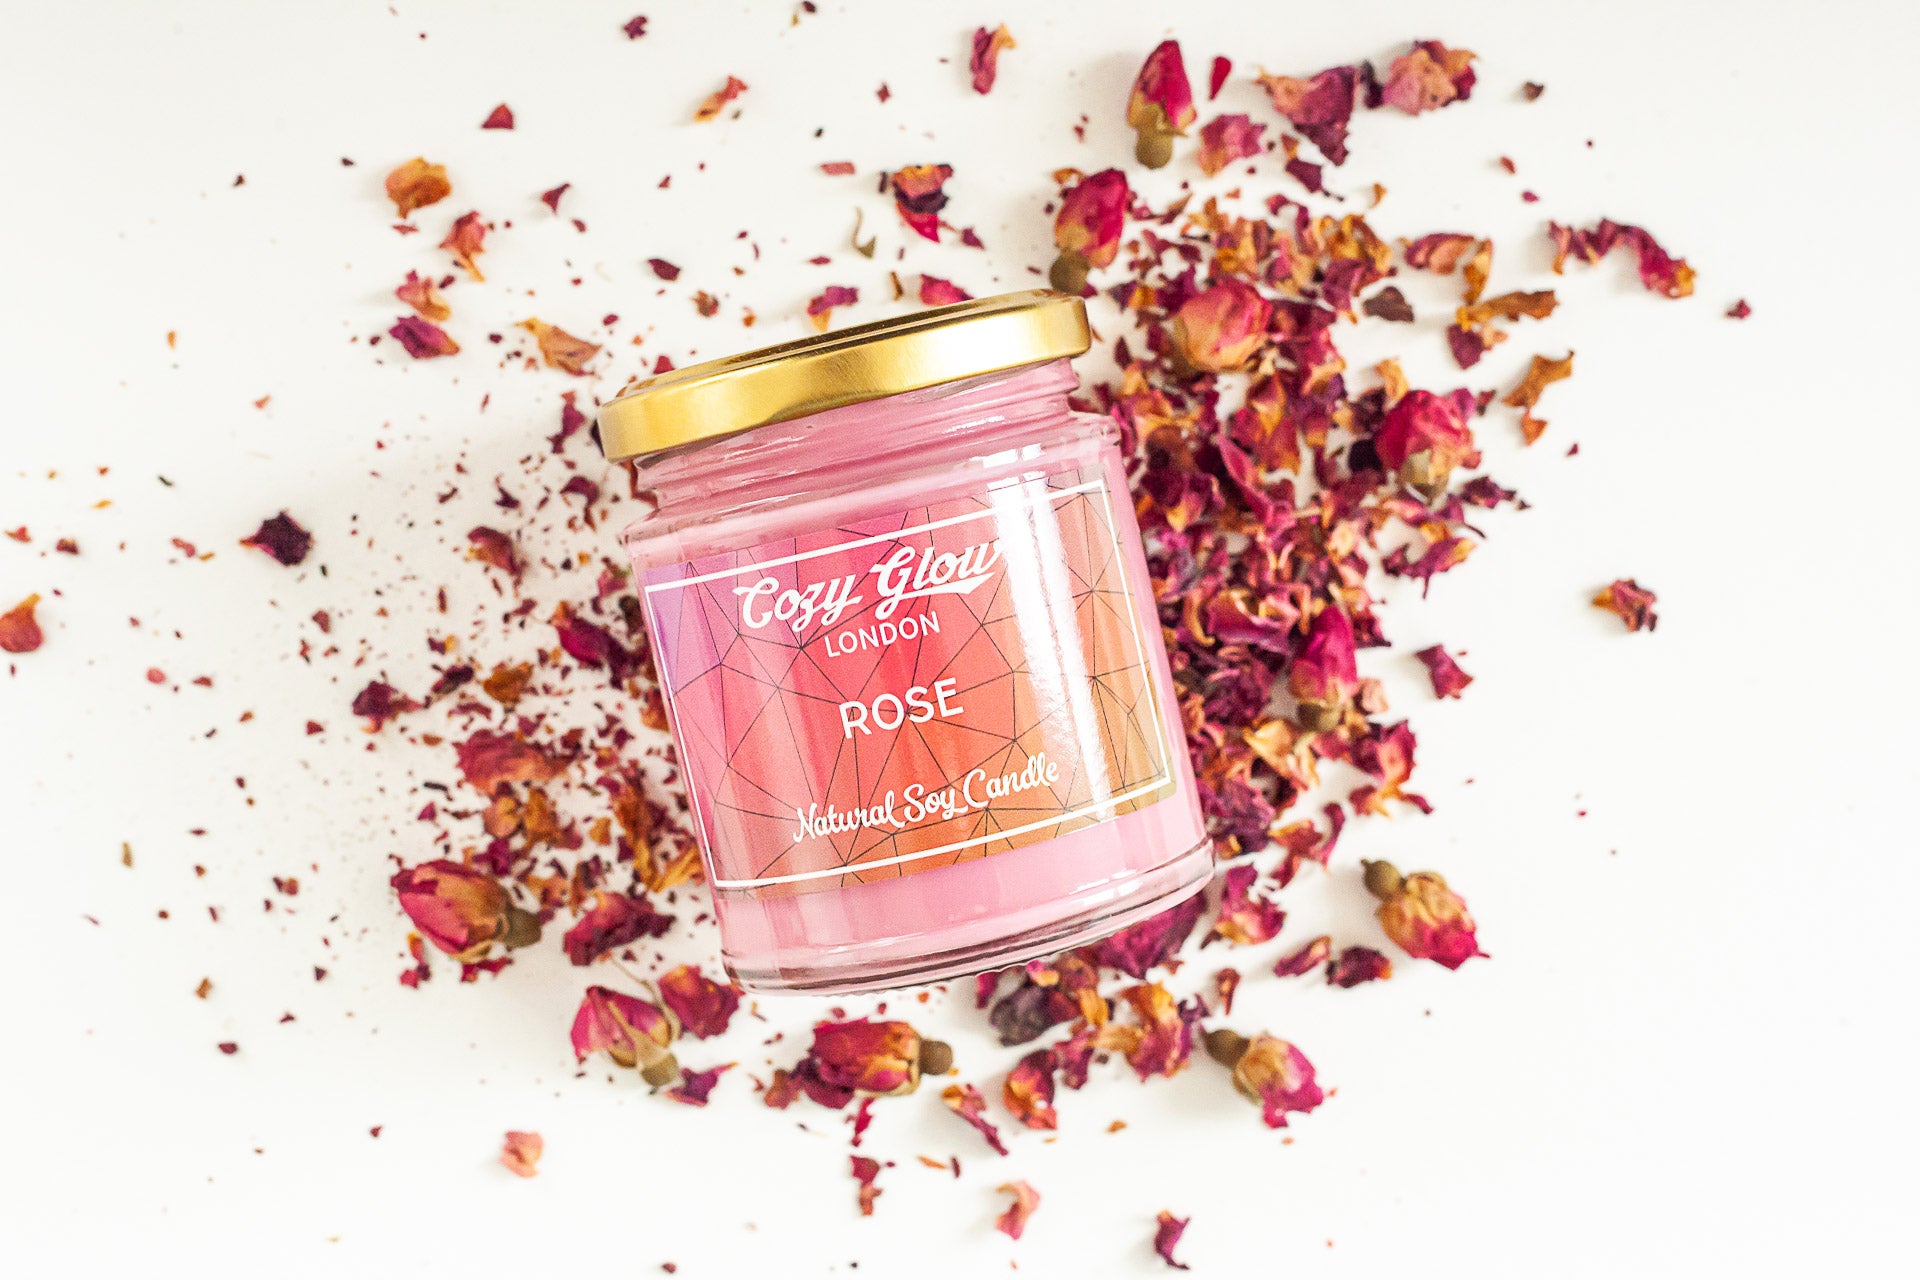 Cozy Glow Rose Regular Soy Candle